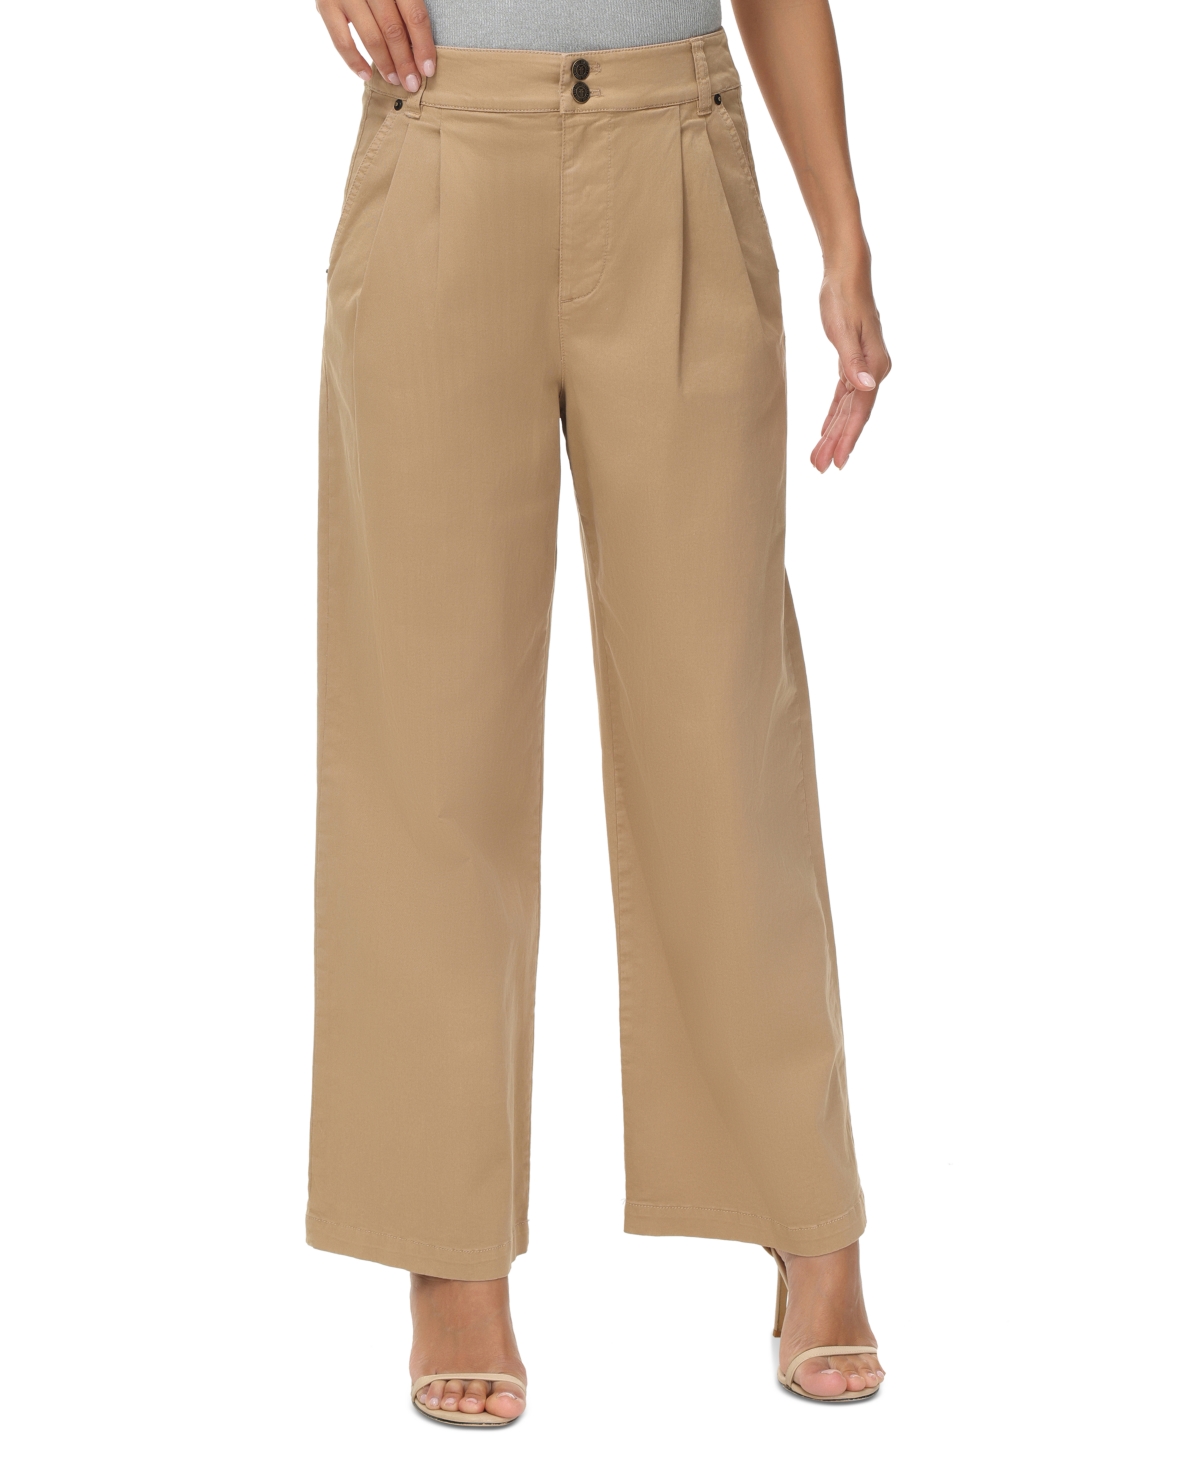 Women's Buckle-Back Pleated High-Rise Pants - Tannin